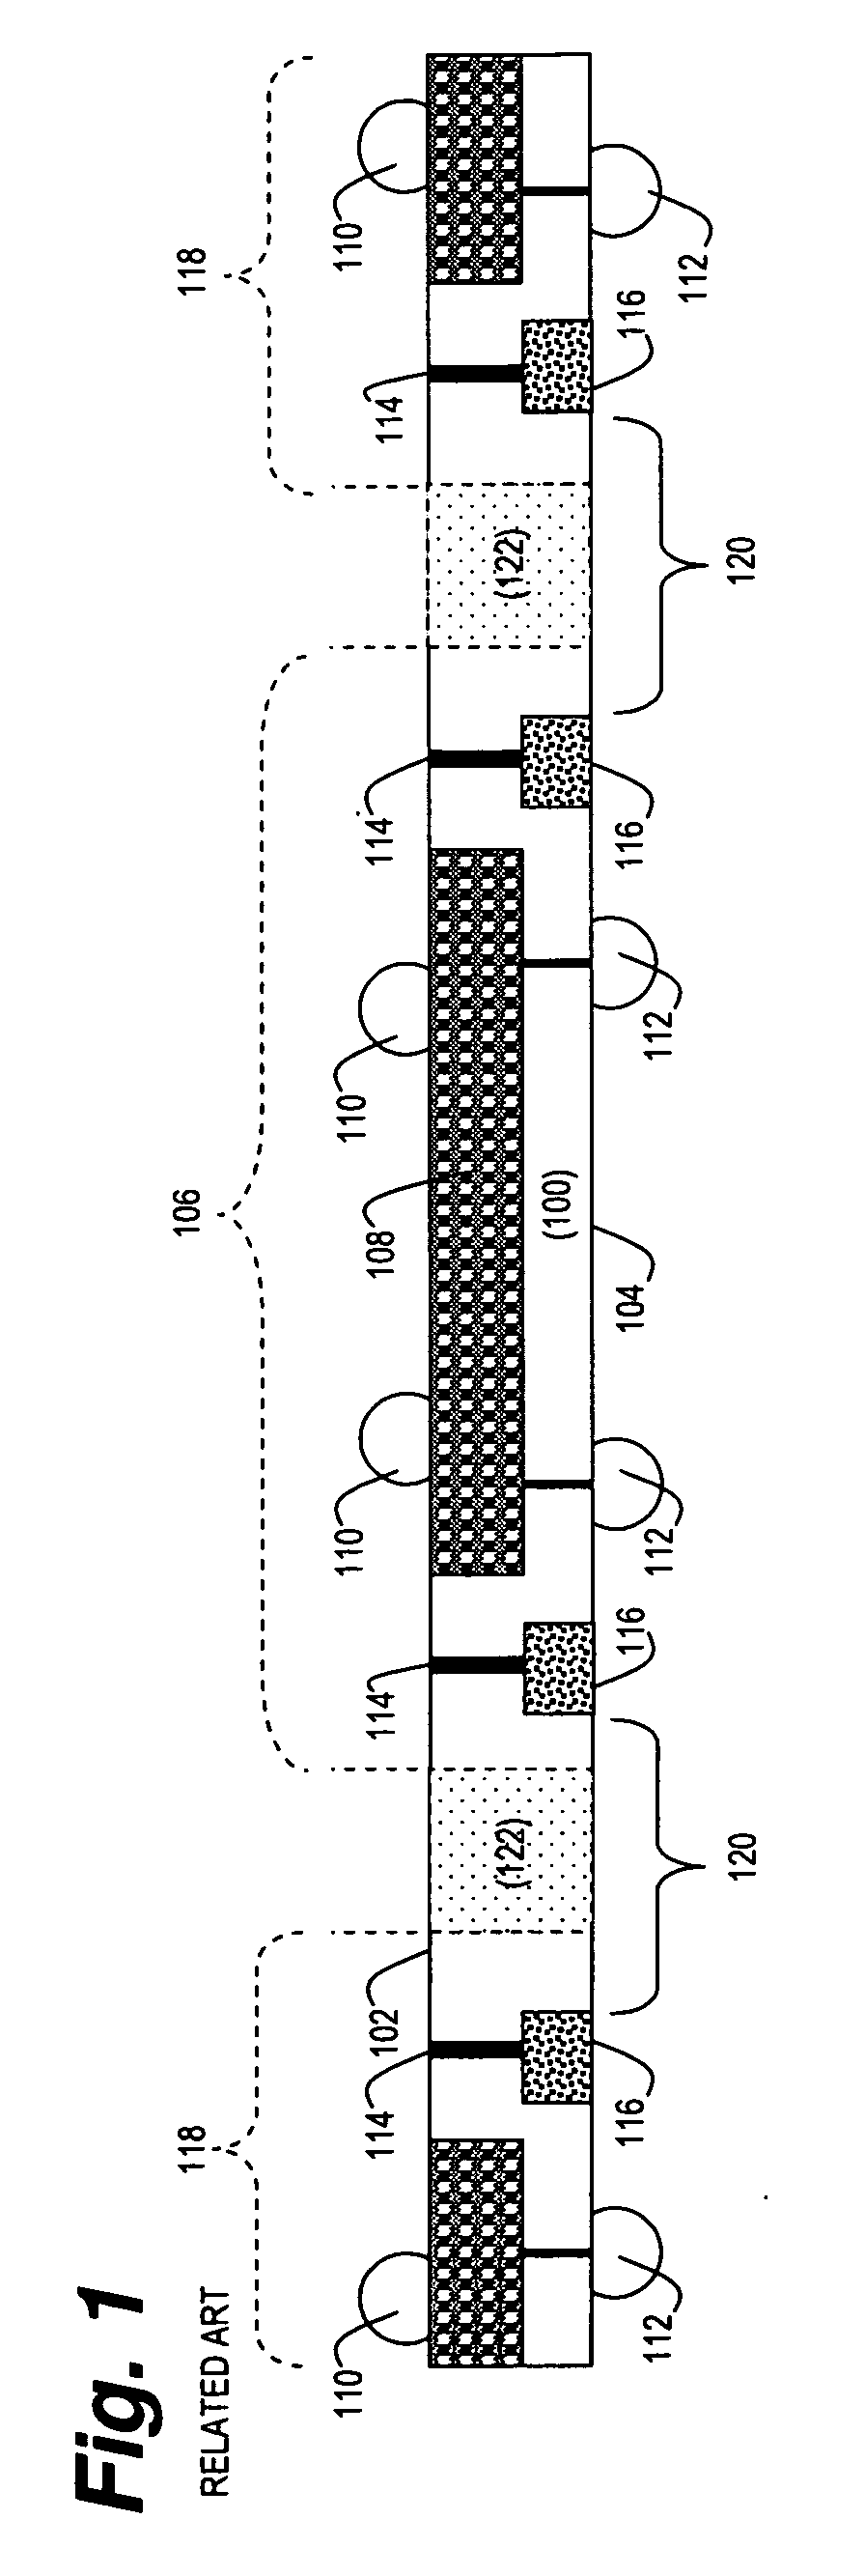 Process for wet singulation using a dicing moat structure